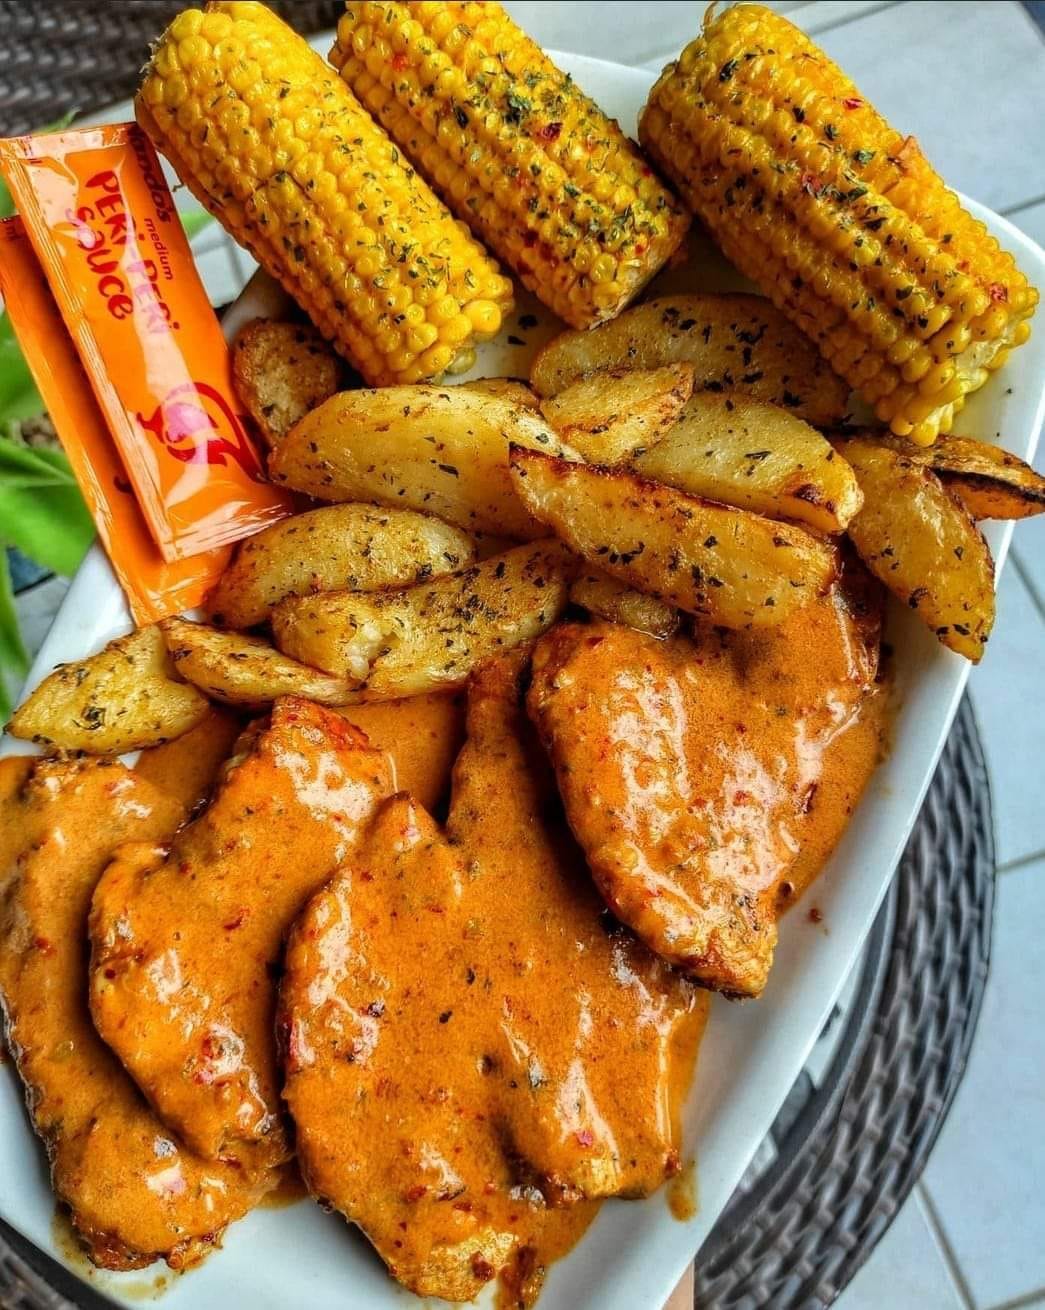 Nando chicken served with wedges and spiced corn